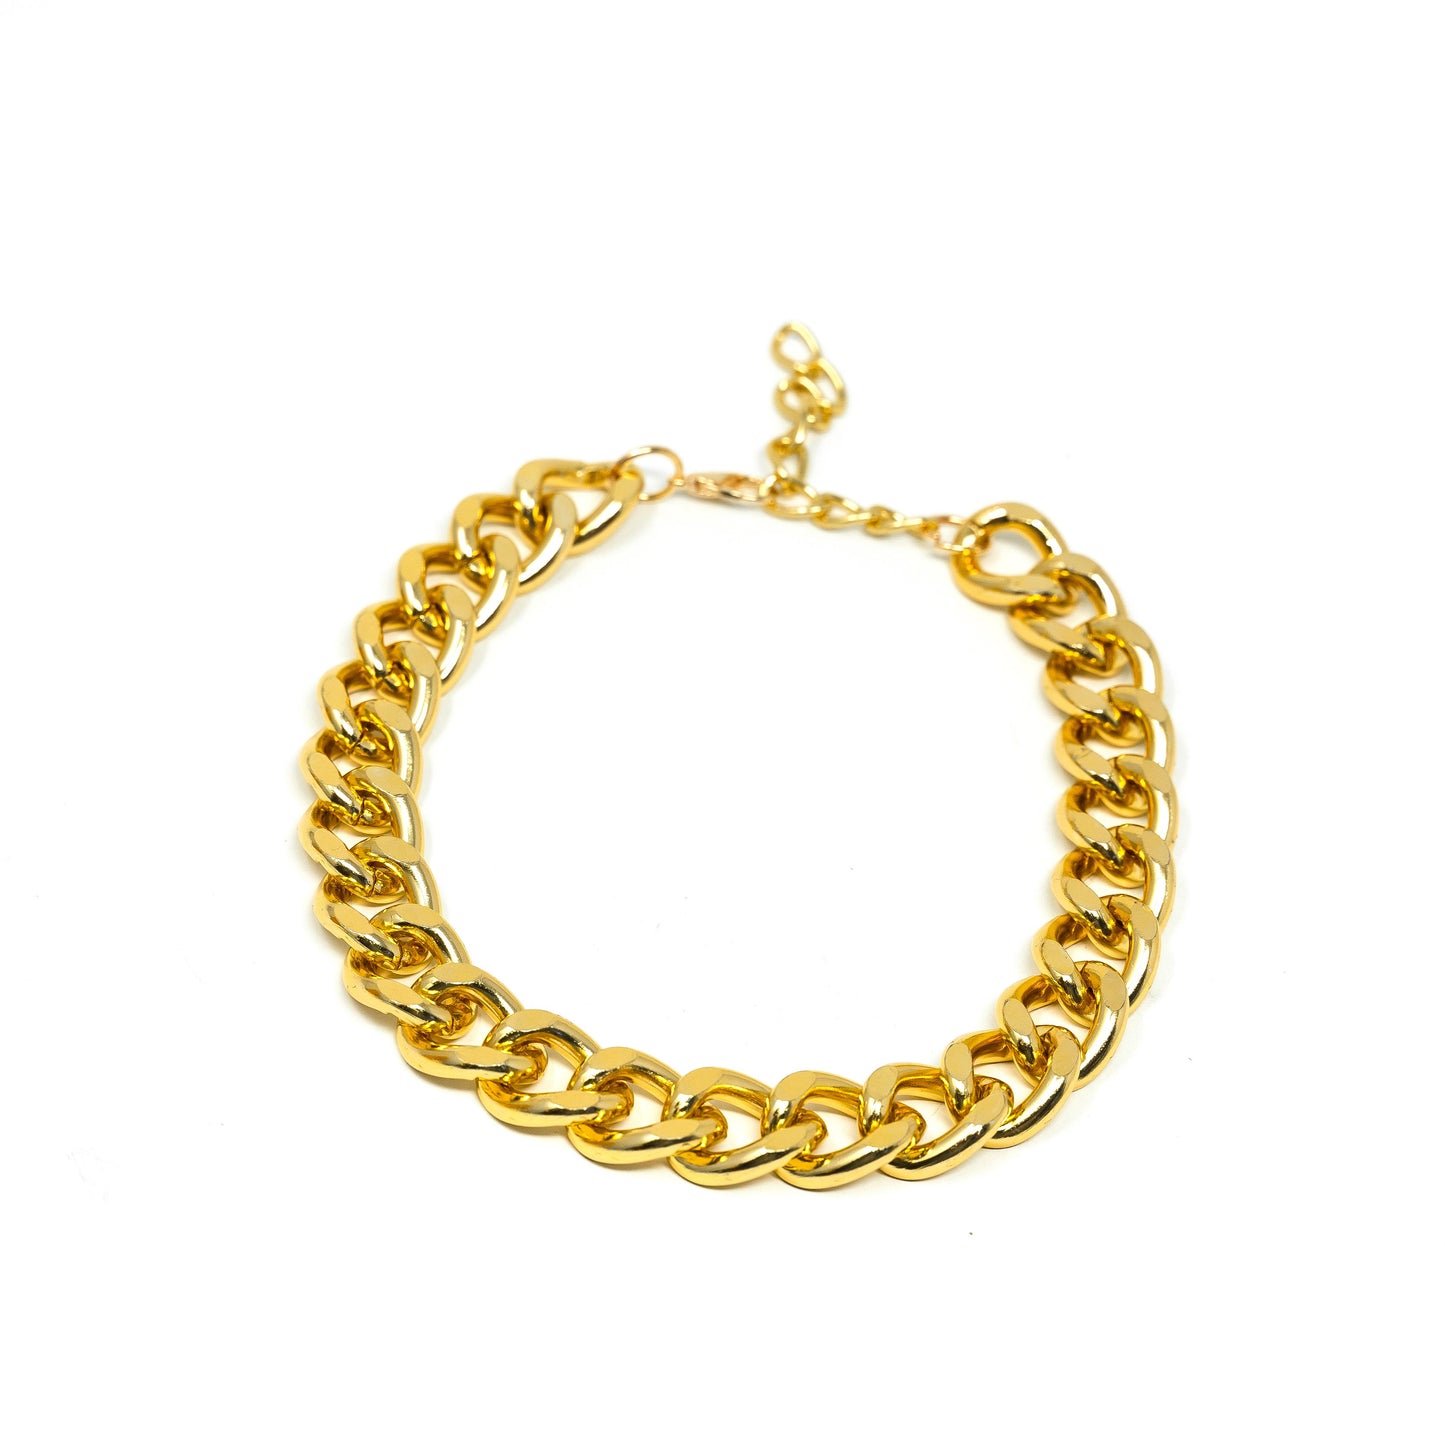 Bold Gold Chain Chokers JEWELRY The Sis Kiss 15mm Curb Links